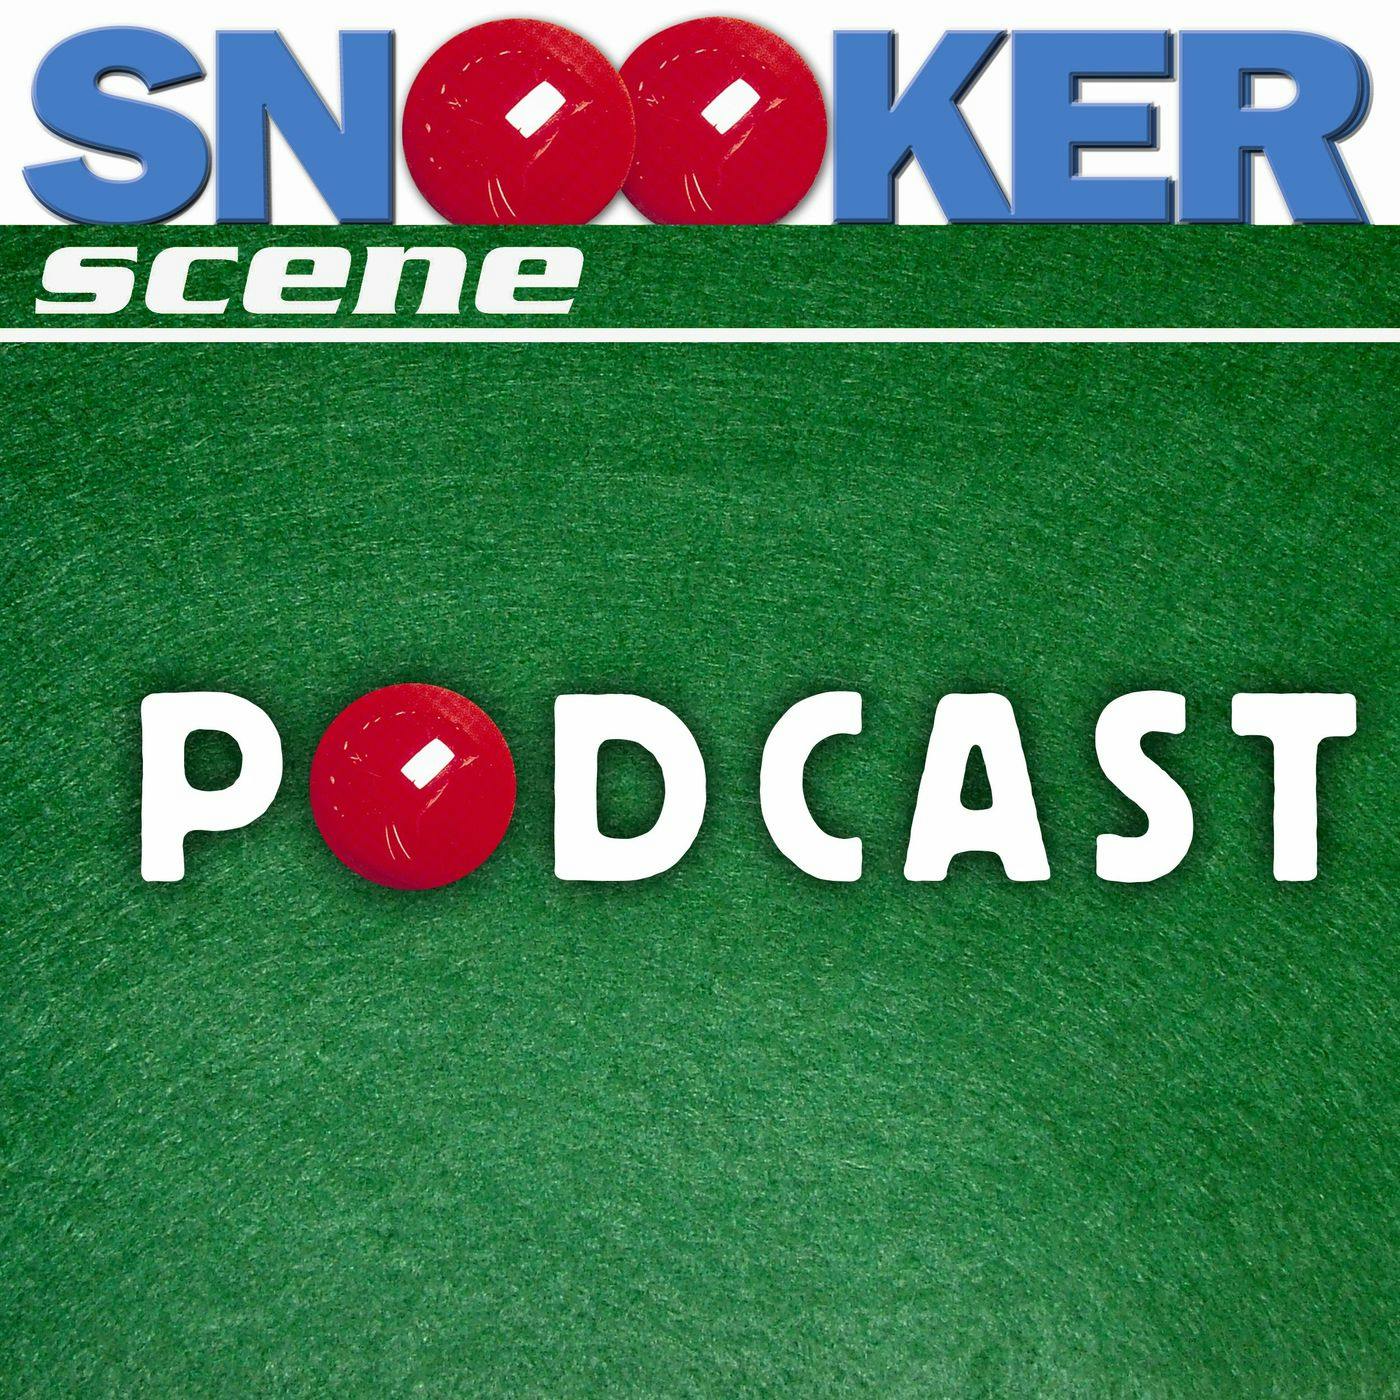 Snooker Scene Podcast episode 178 - Over to You